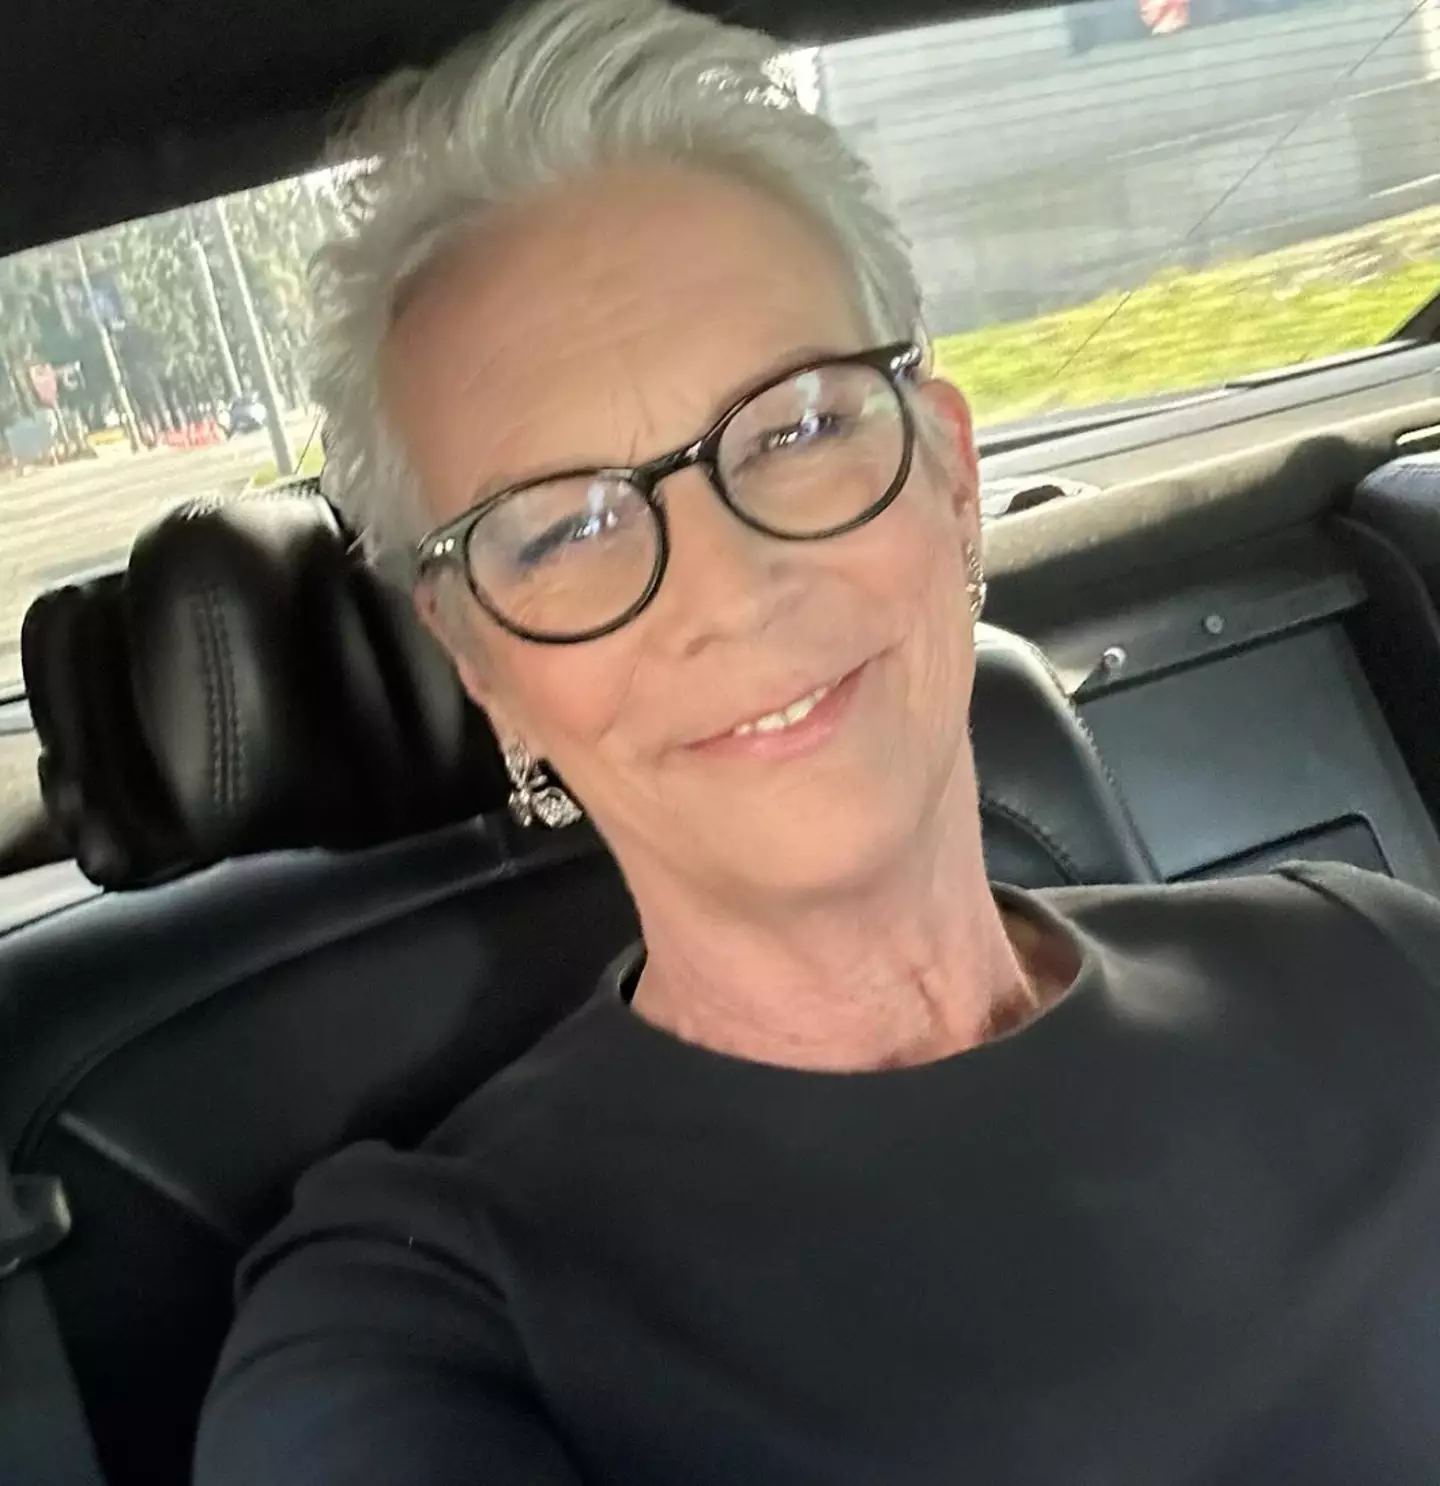 Jamie Lee Curtis had somewhere important to be after her presenting gig at the Oscars.